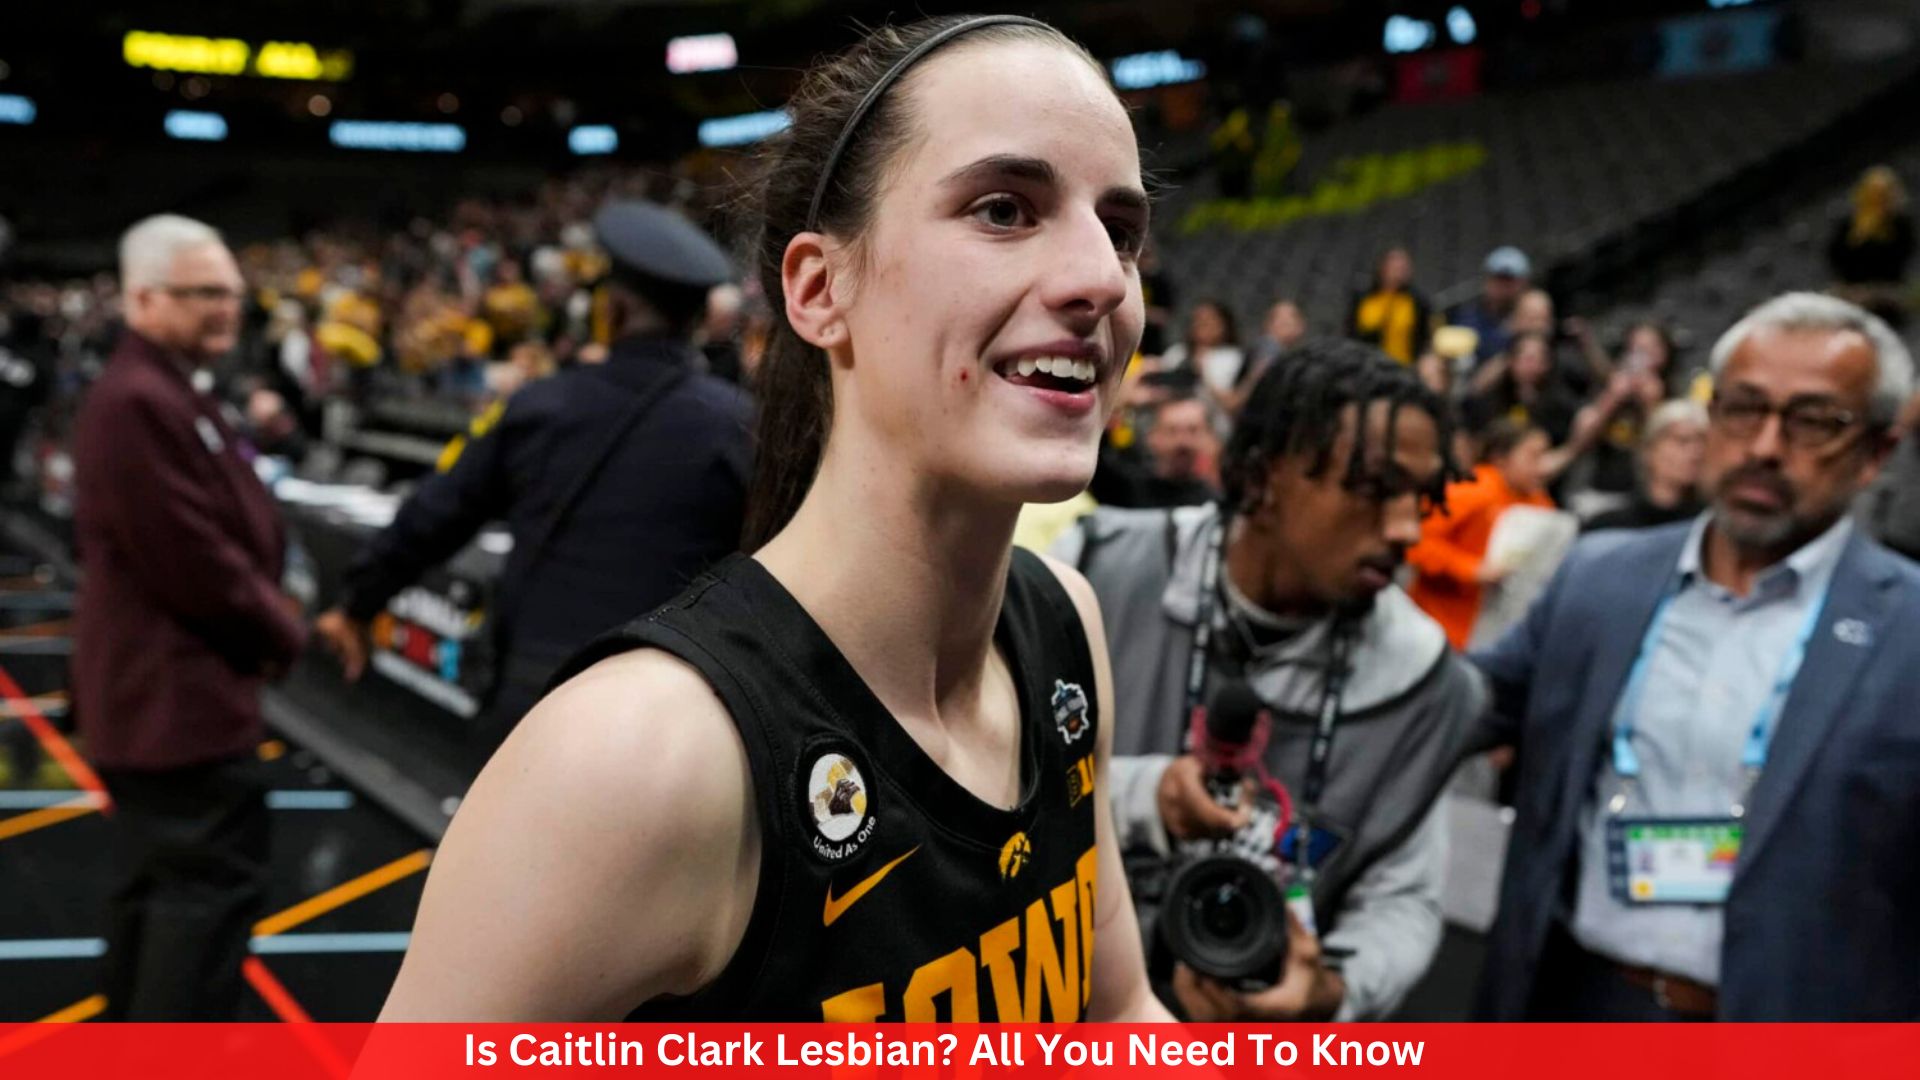 Is Caitlin Clark Lesbian? All You Need To Know